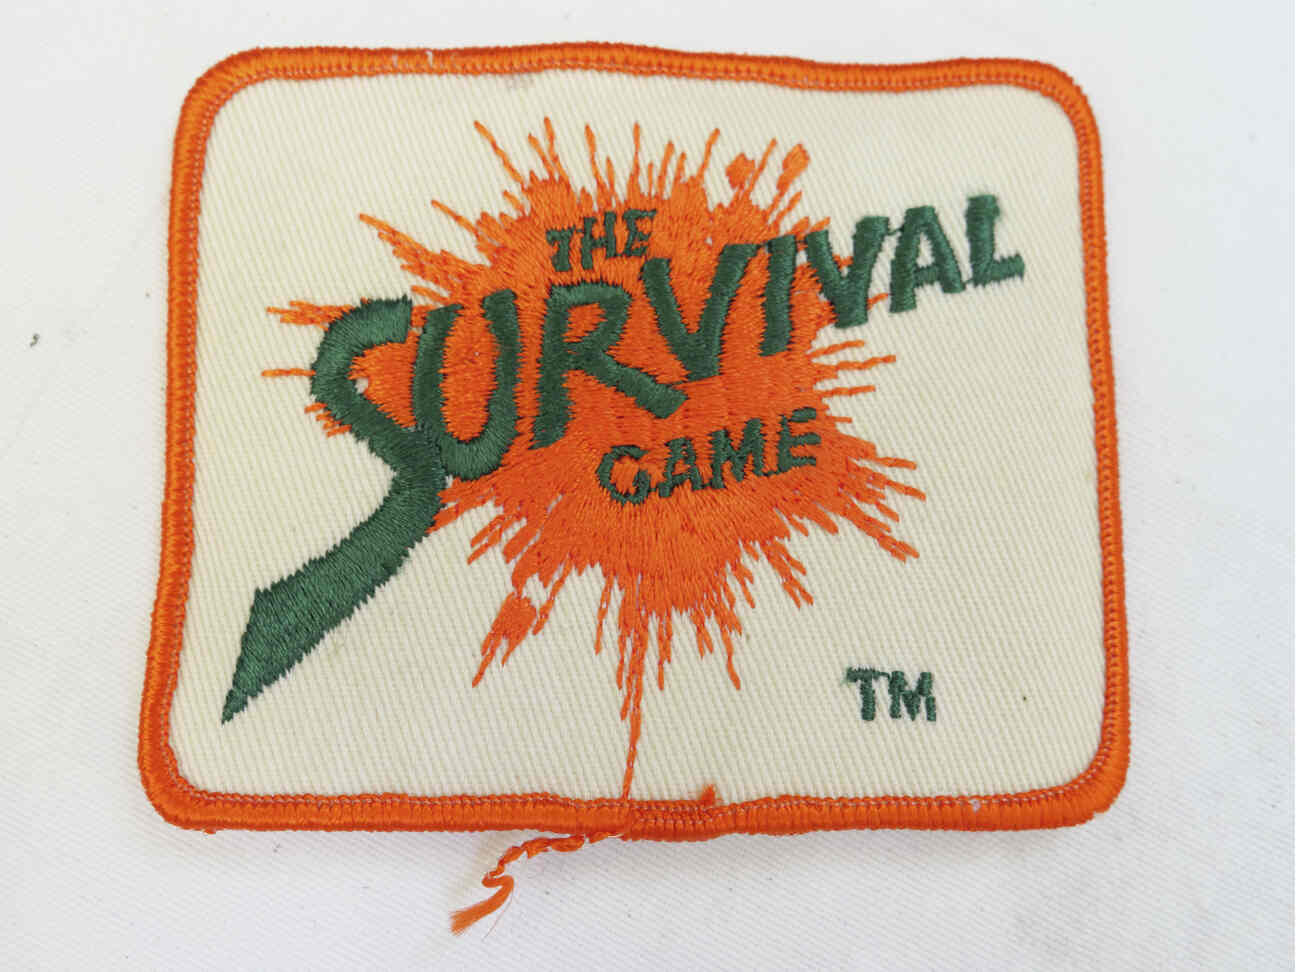 National Survival Games Patch, 3.25x2.5 inches, great shape